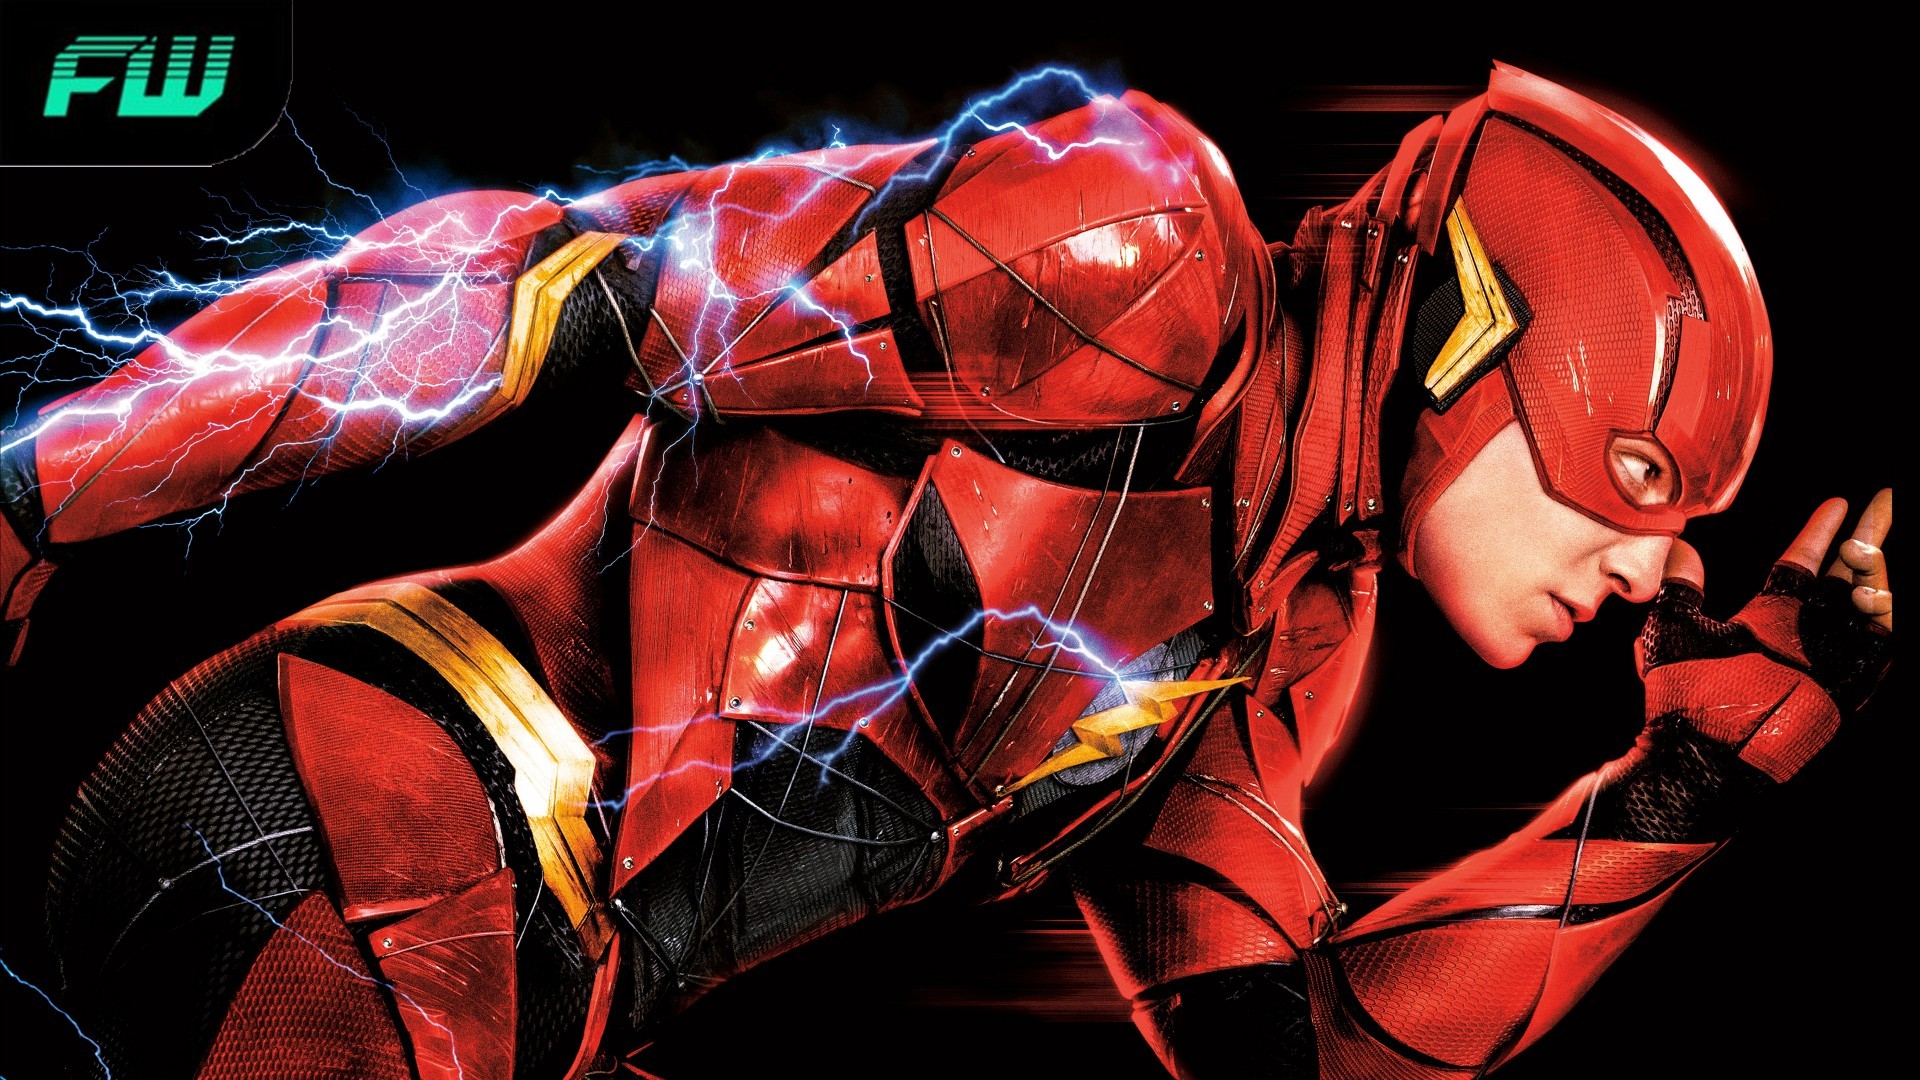 The Flash Movie: Director Says "Emotional" Conflict The Core of the Movie